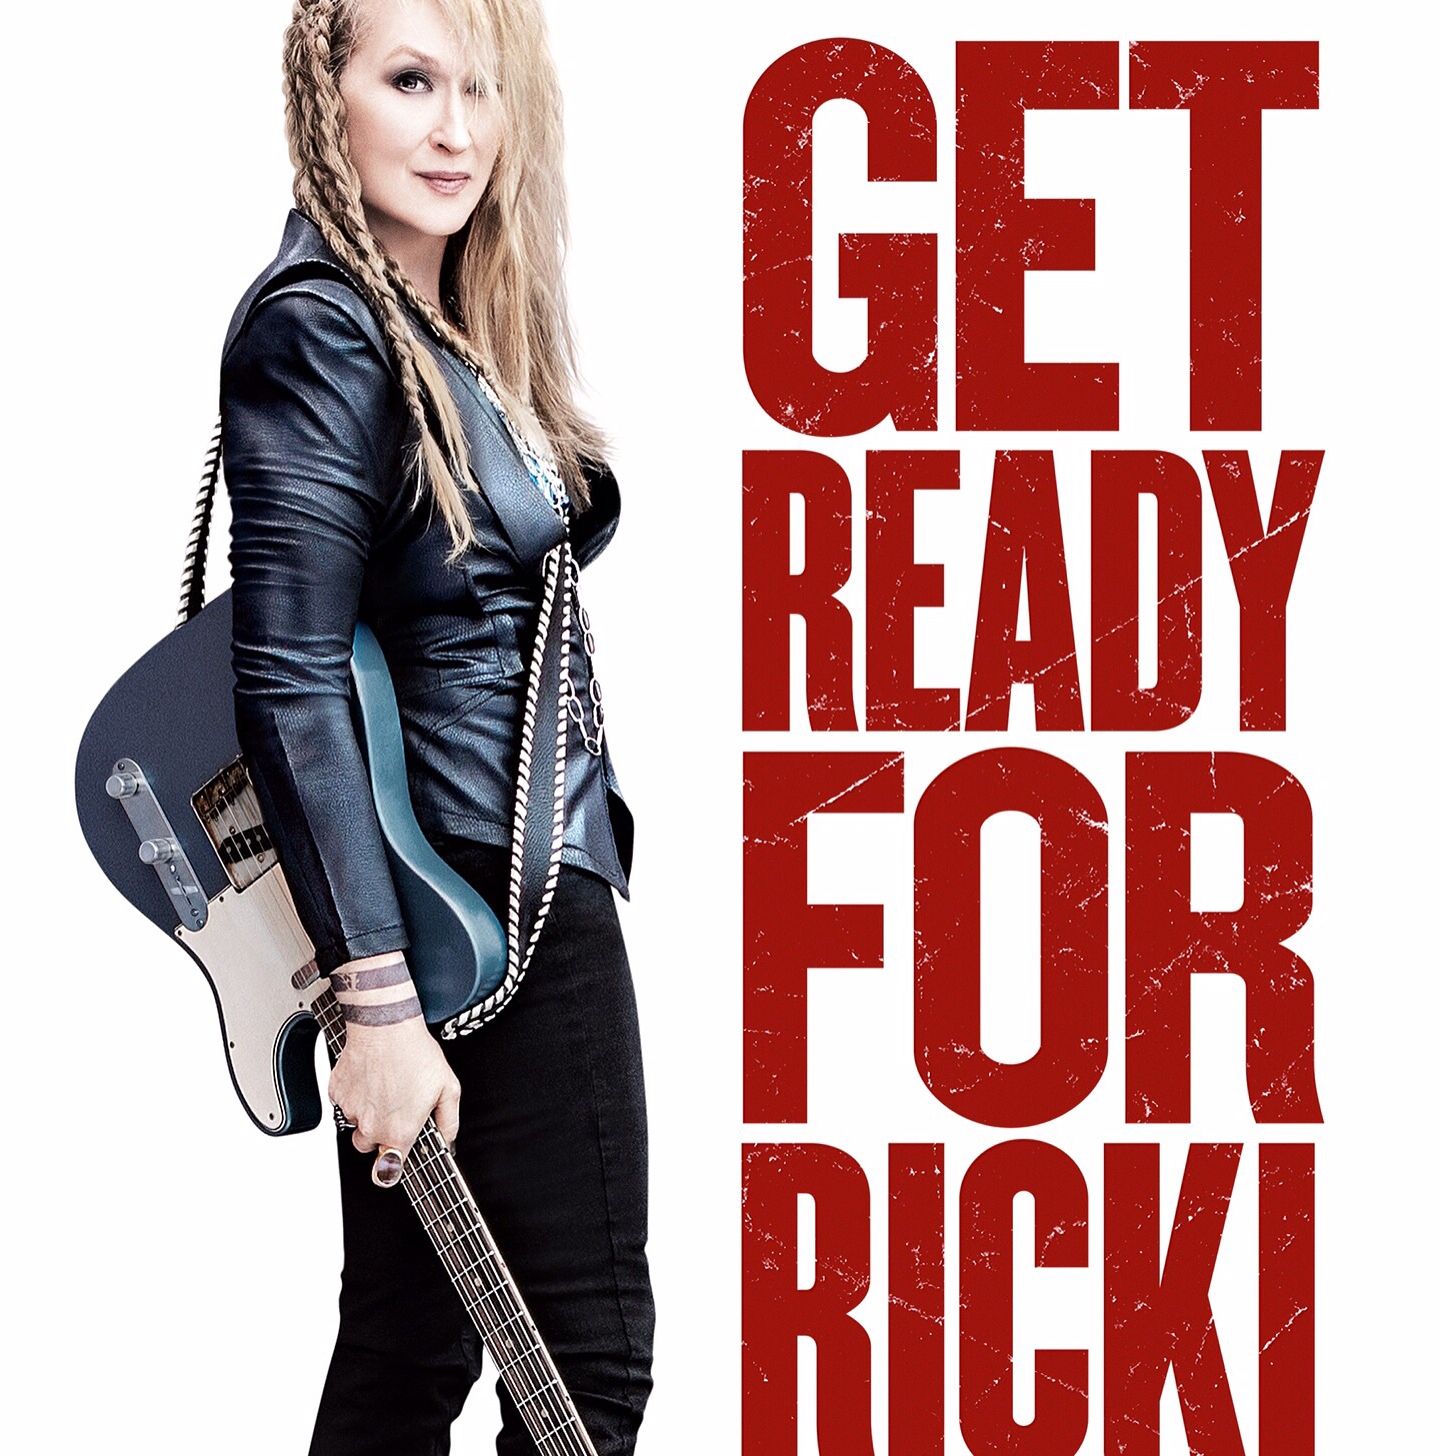 Ricki and the Flash Banner